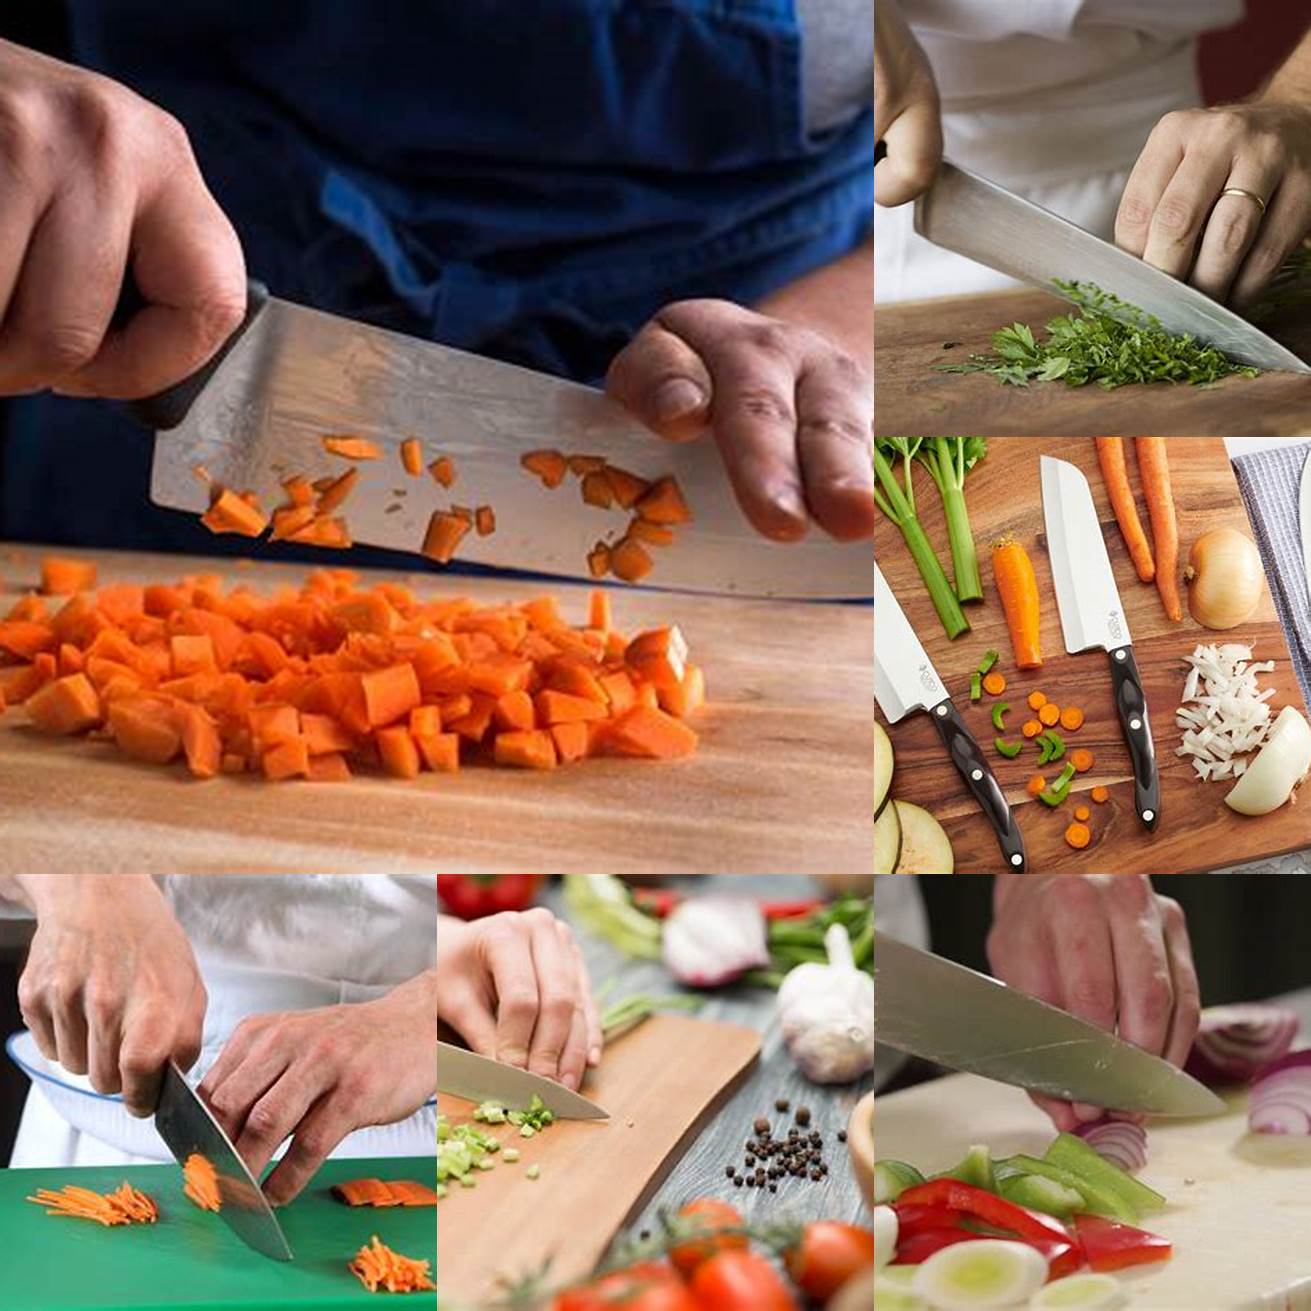 1 Chefs knife in action while cutting vegetables